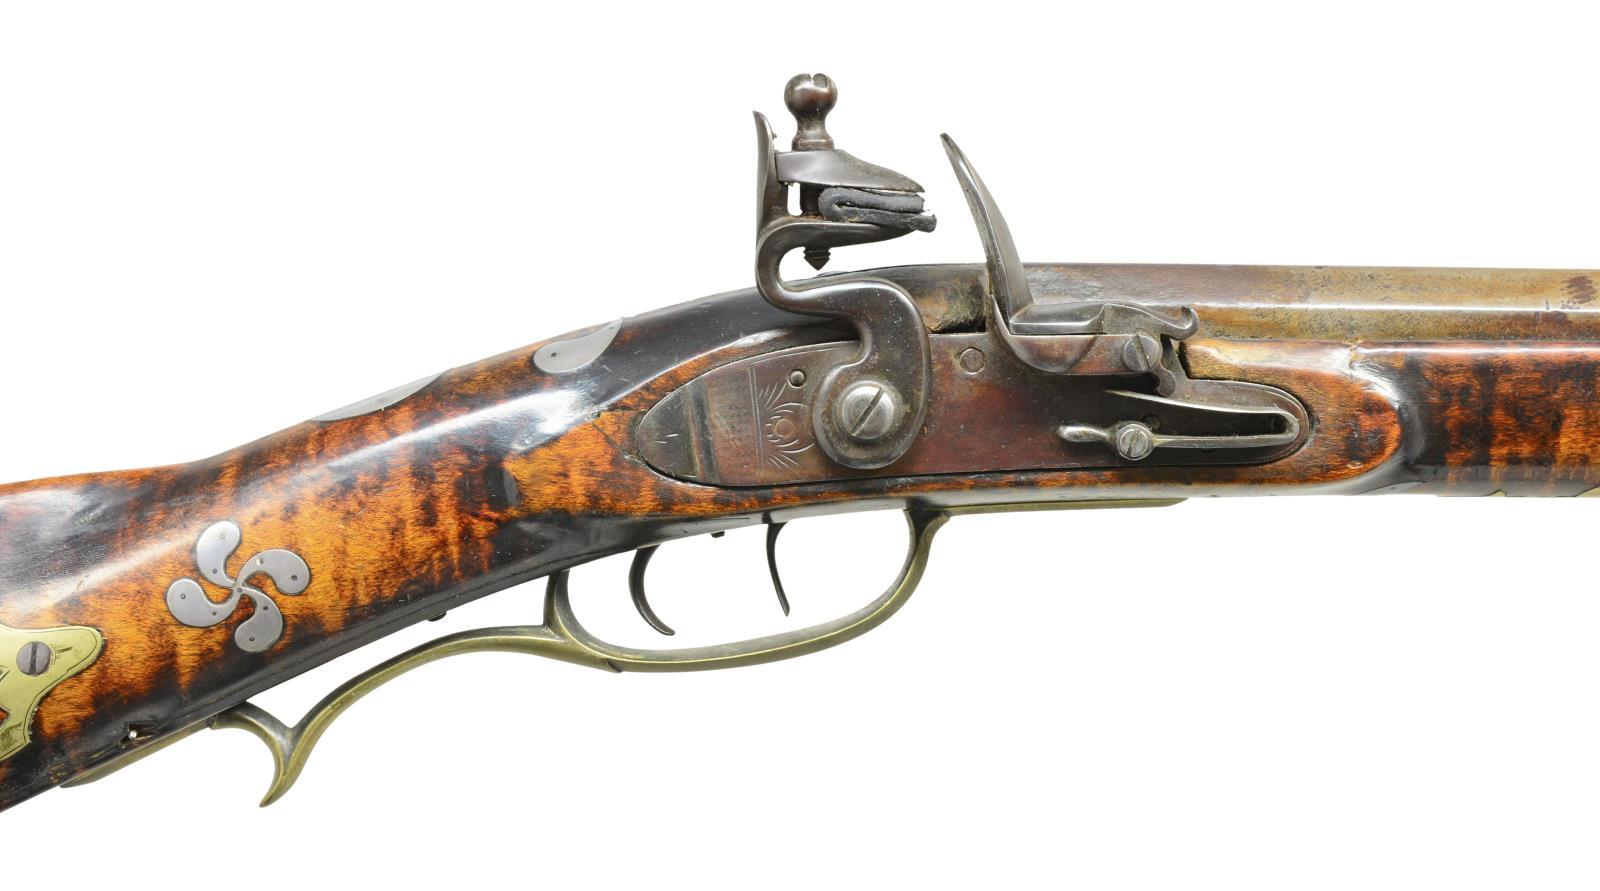 EXTREMELY DECORATED CURLY MAPLE CARVED RIFLE